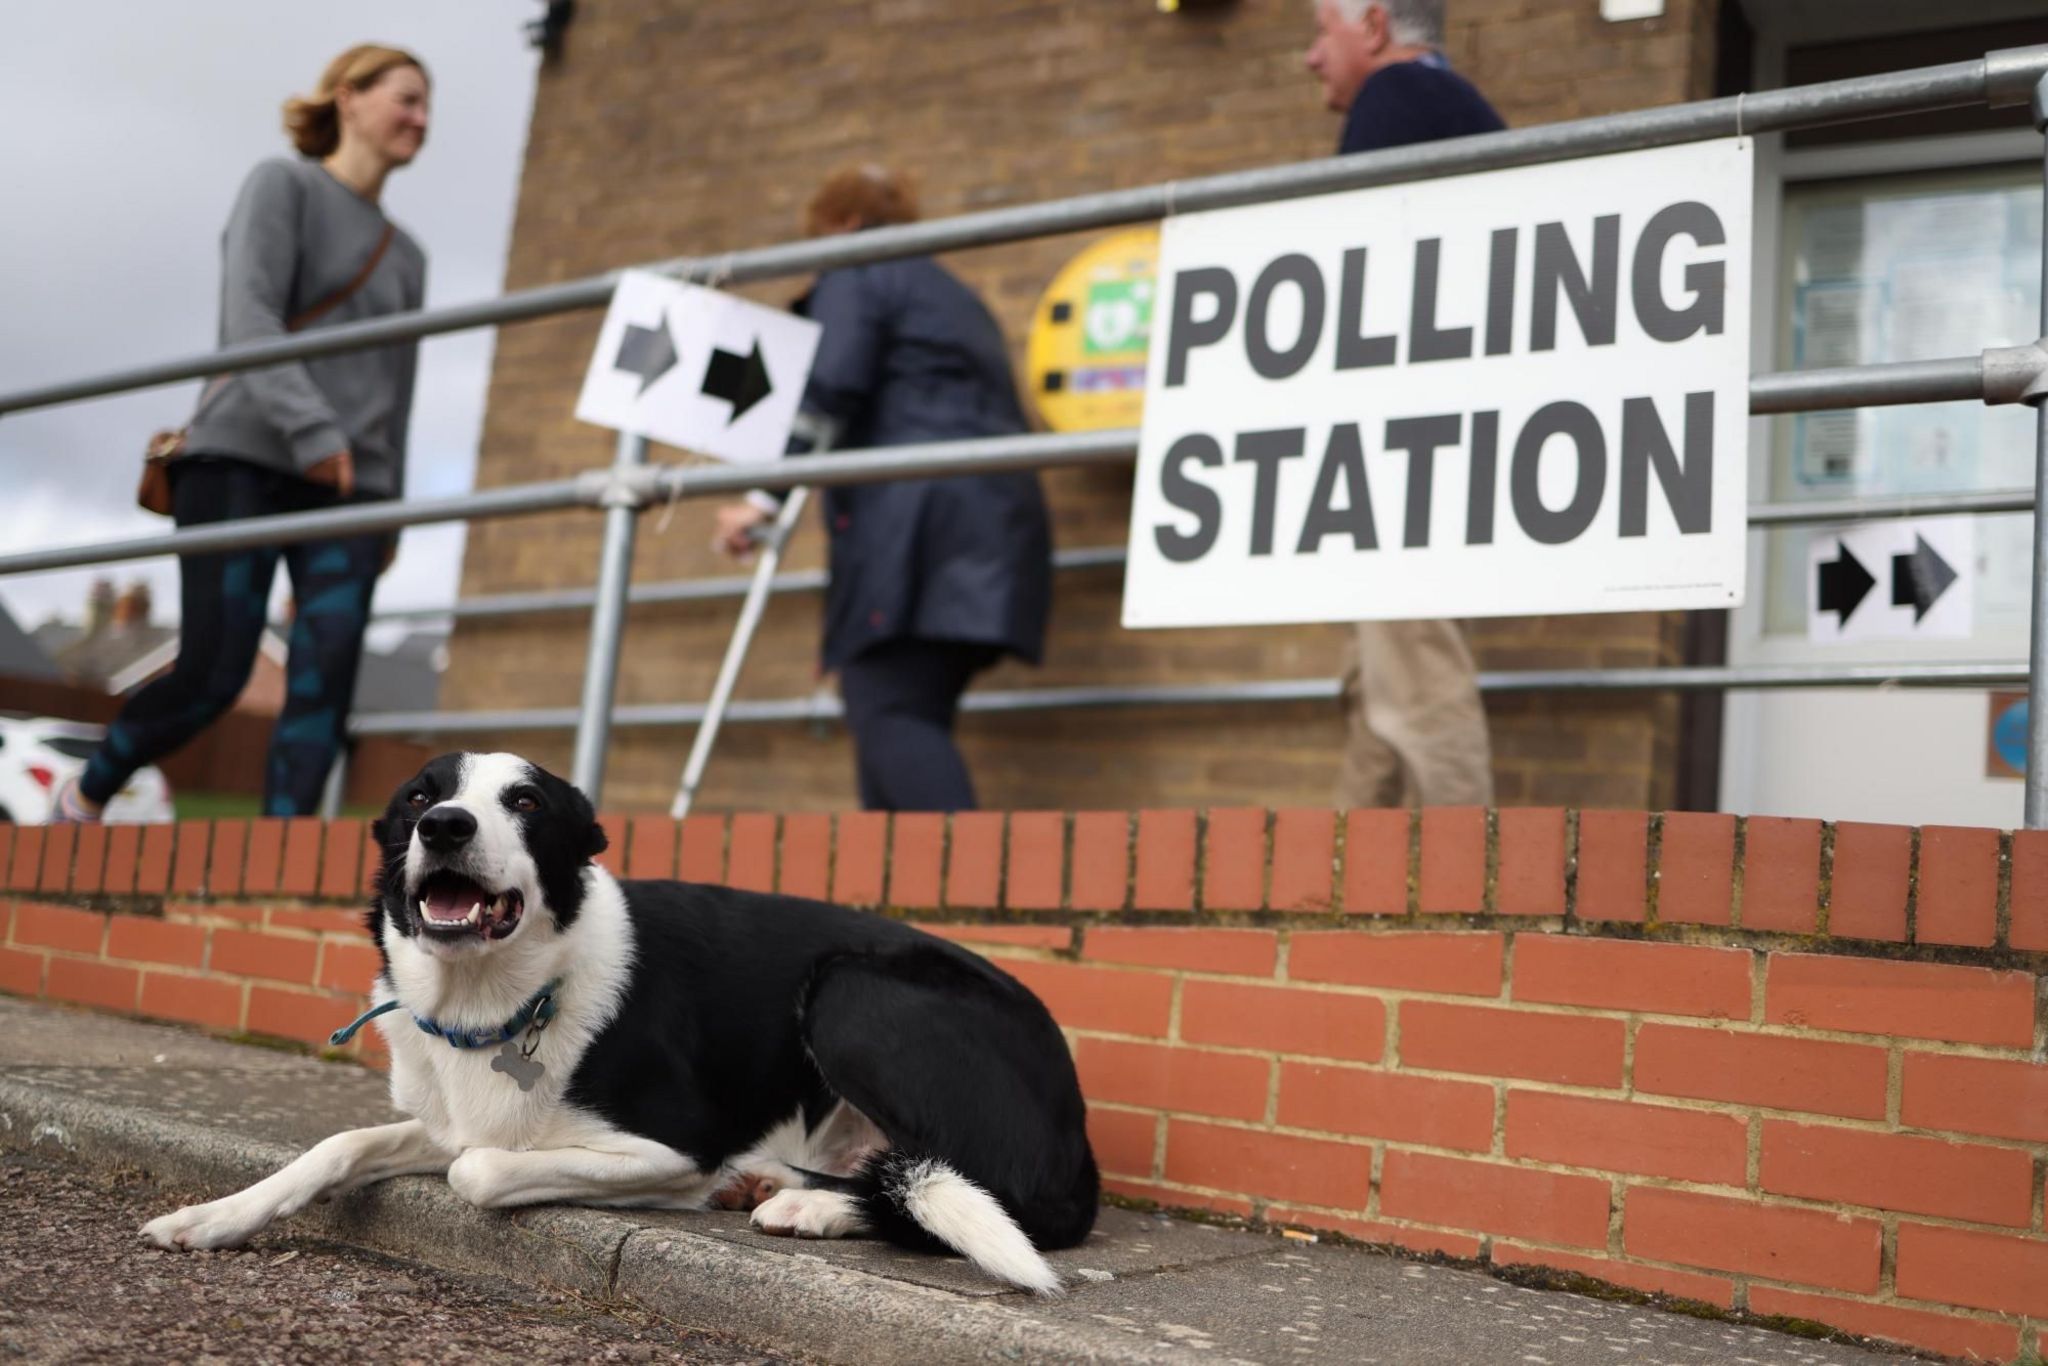 A dog outside a polling station in Flitwick